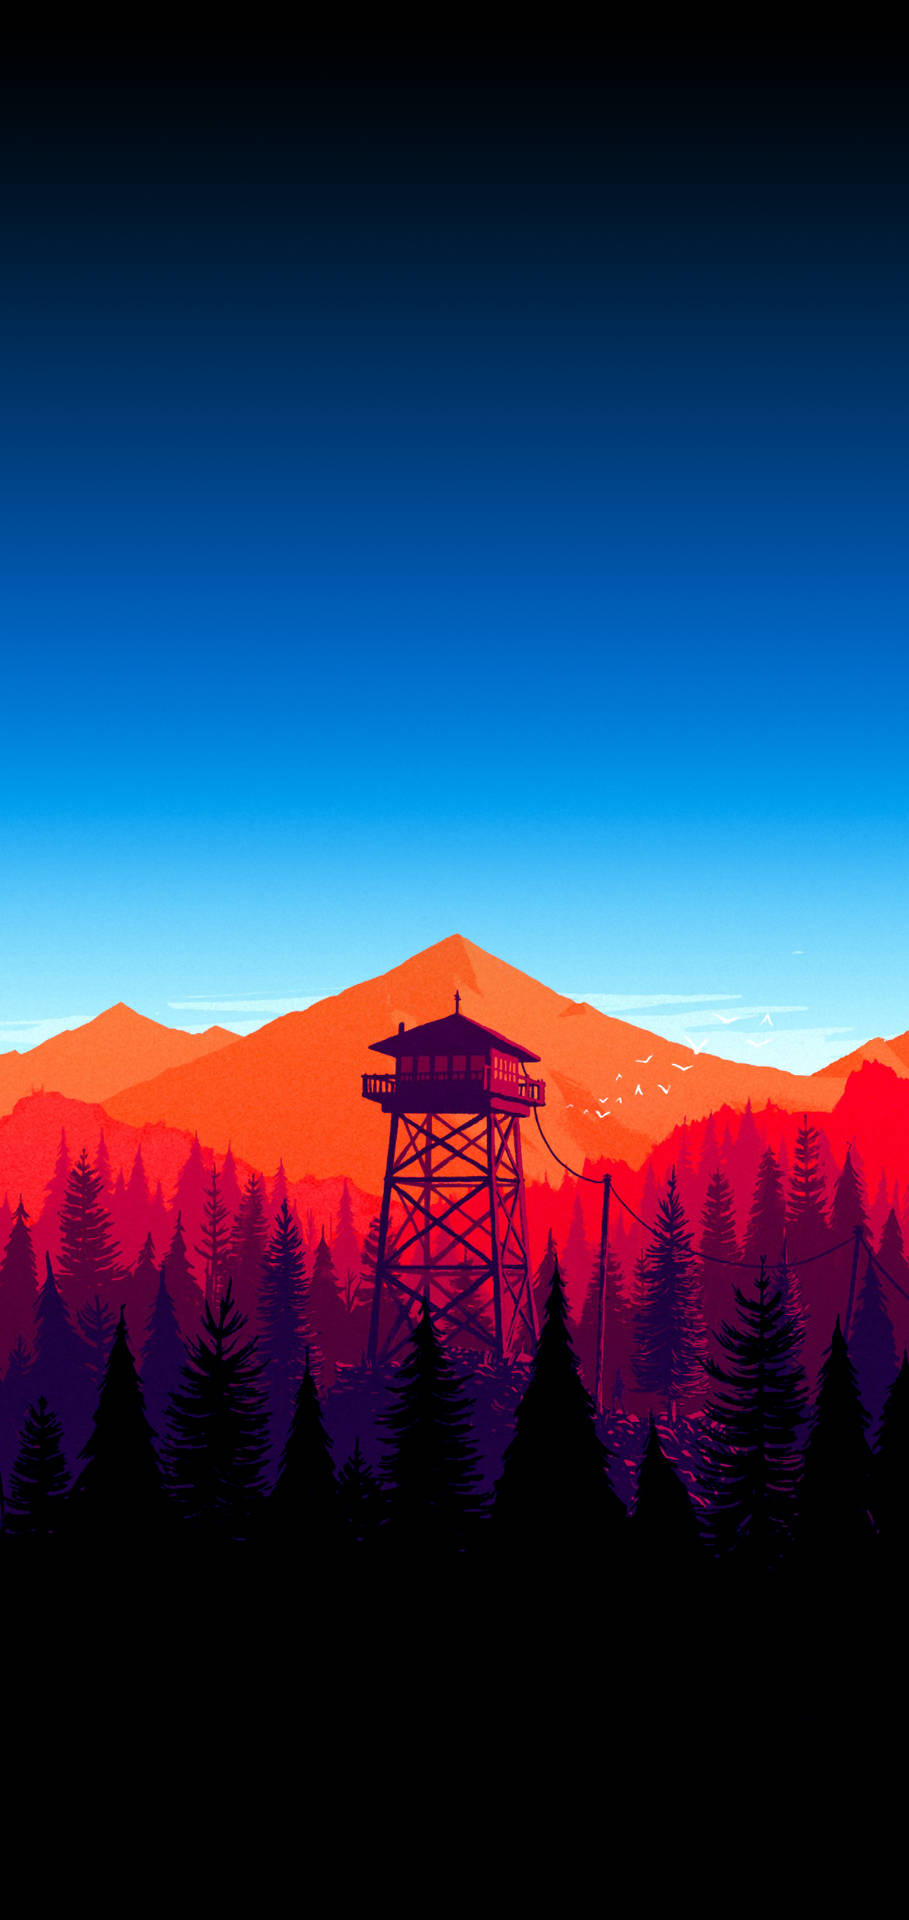 "Wonder at the breathtaking Amoled mountainscape!" Wallpaper